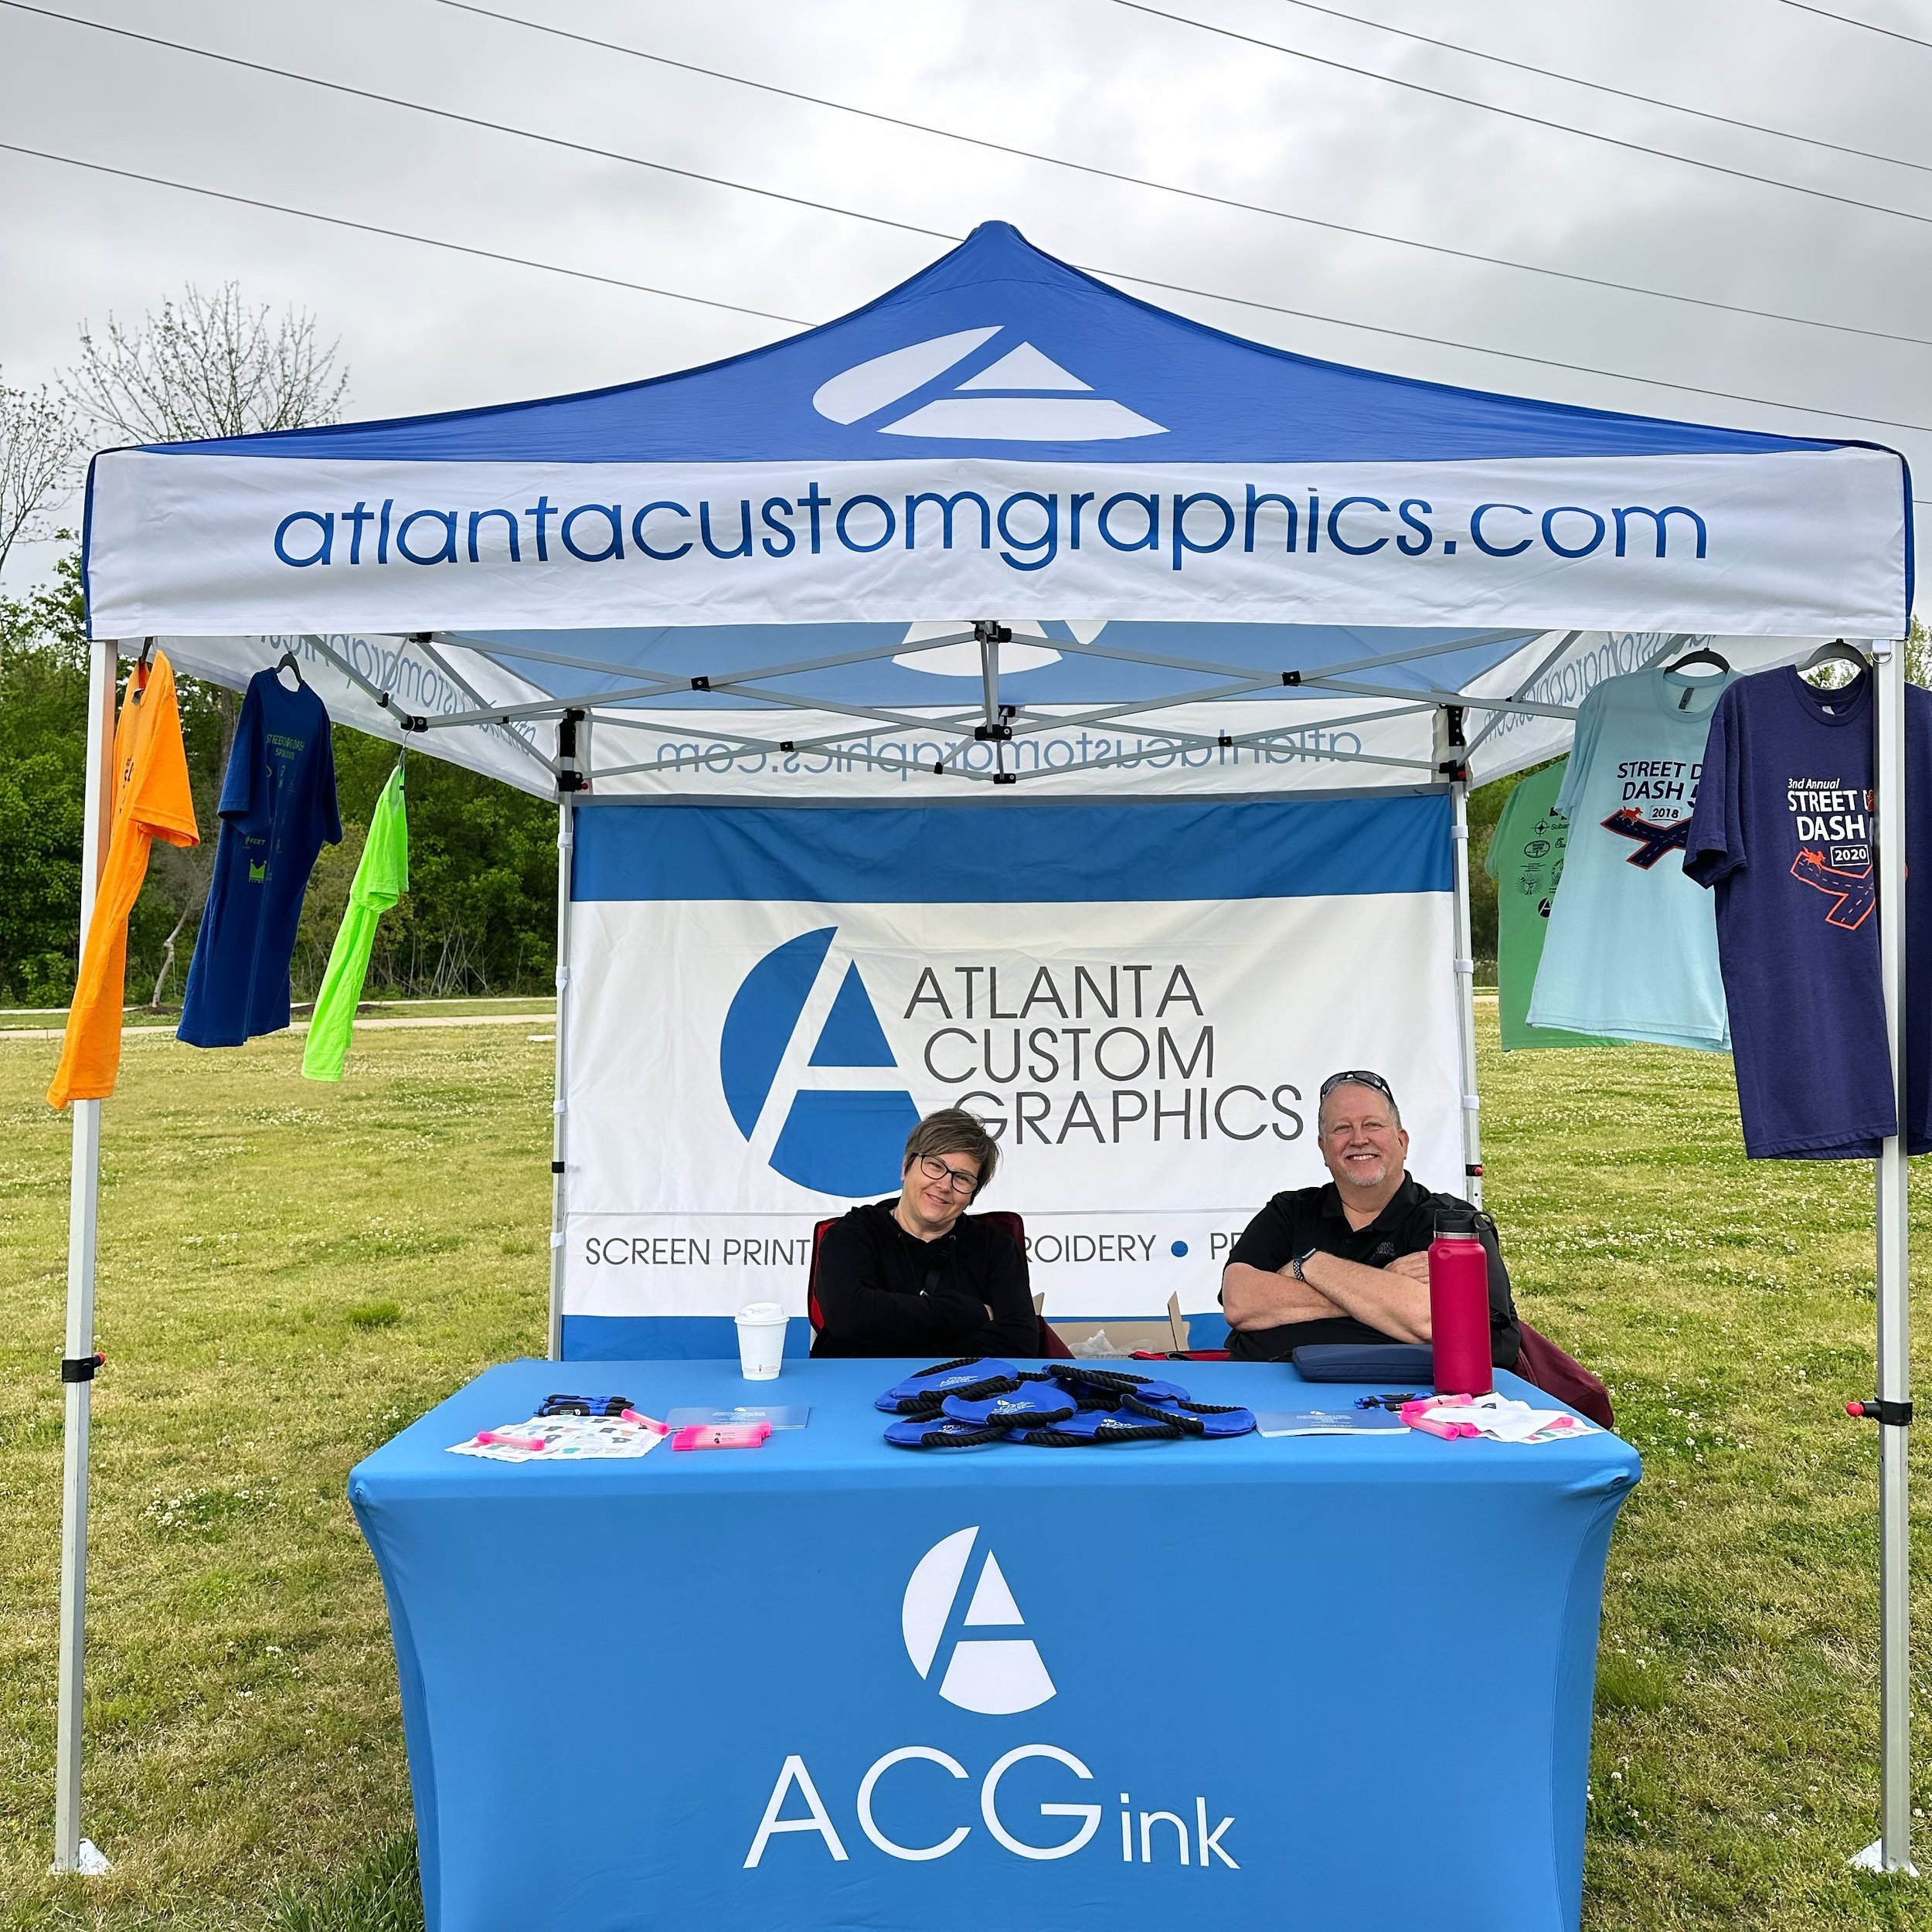 A big shoutout to ACG Ink for being the backbone of our Street Dog Dash every year! 🙌 Your dedication to providing the most amazing custom T-shirts has truly elevated our event. Working with you has been a breeze - you listen to our requests, work q